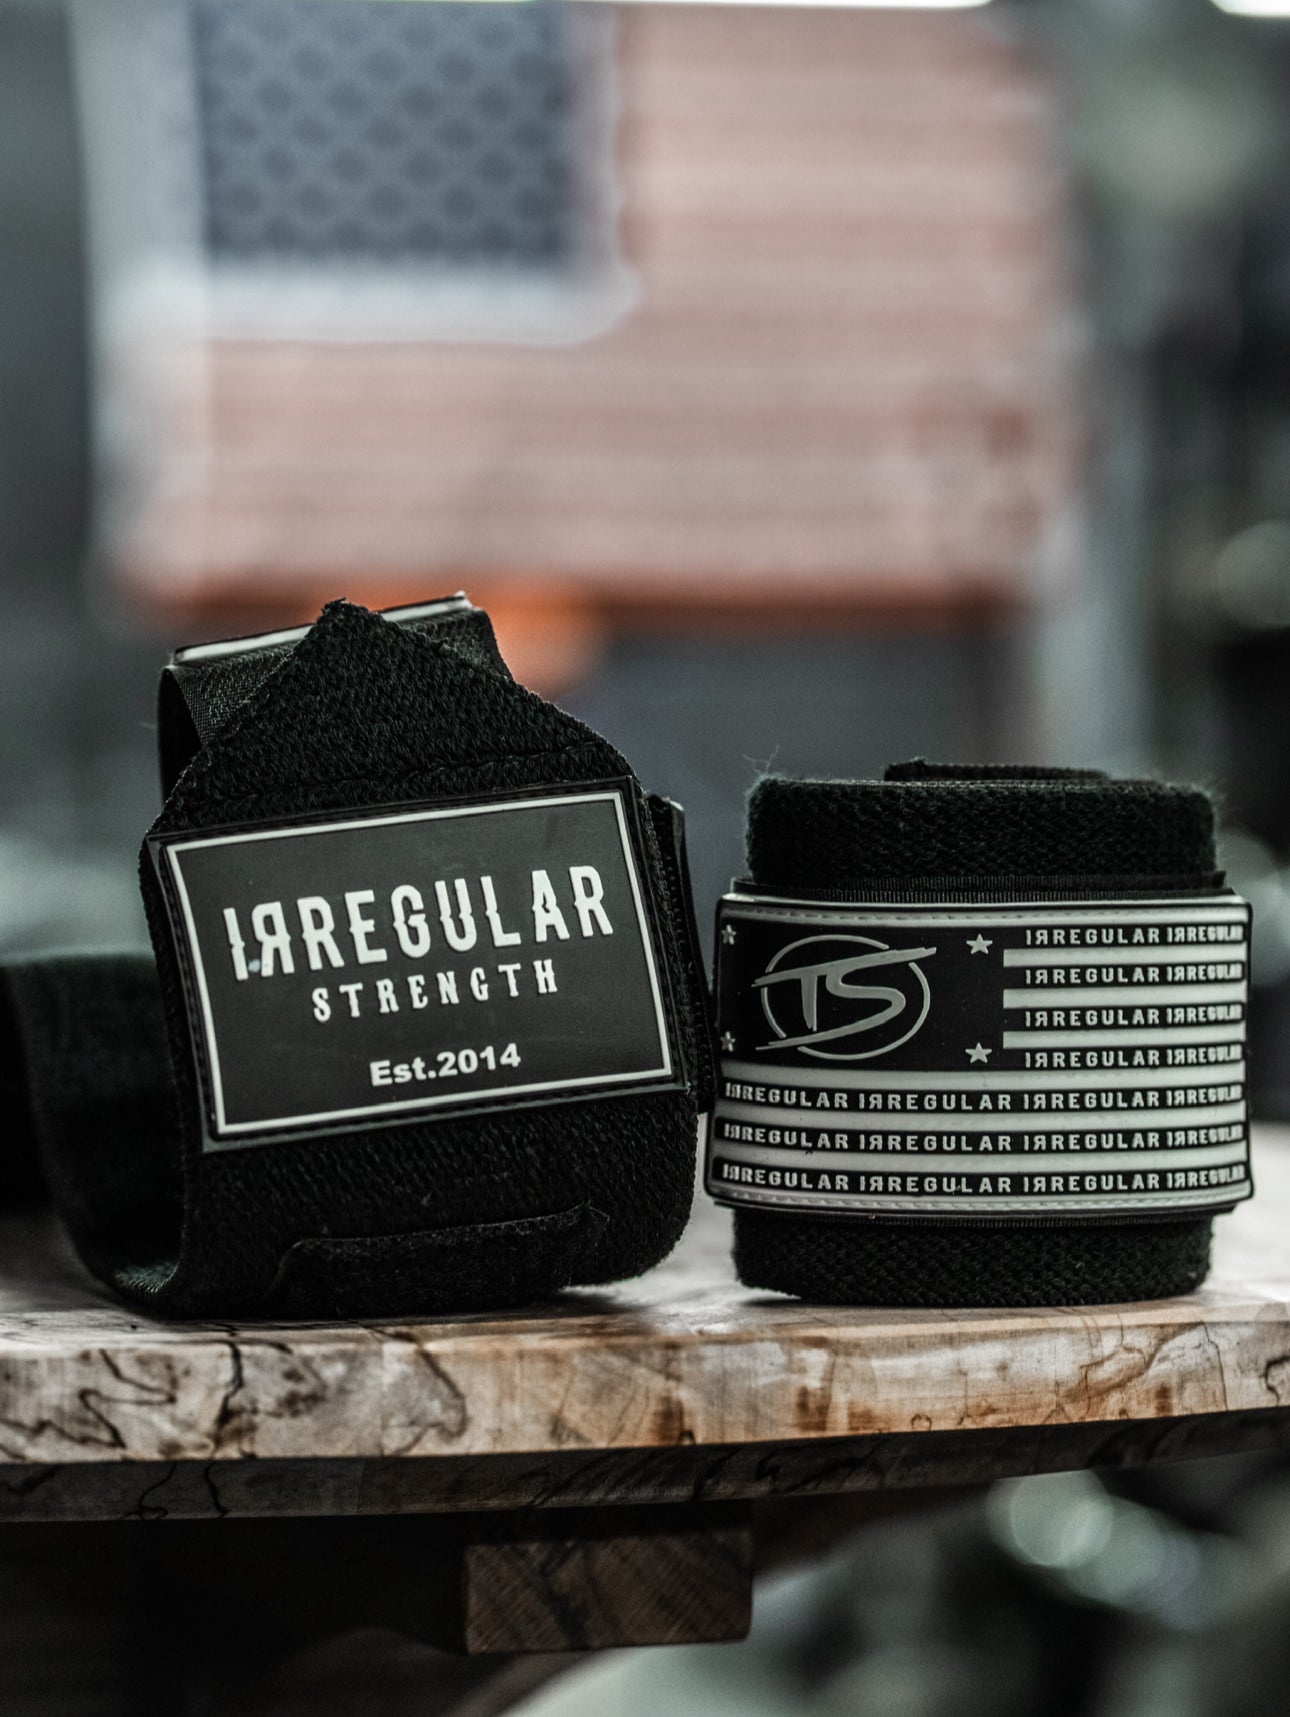 “The OG's” Limited Edition Wrist Wraps